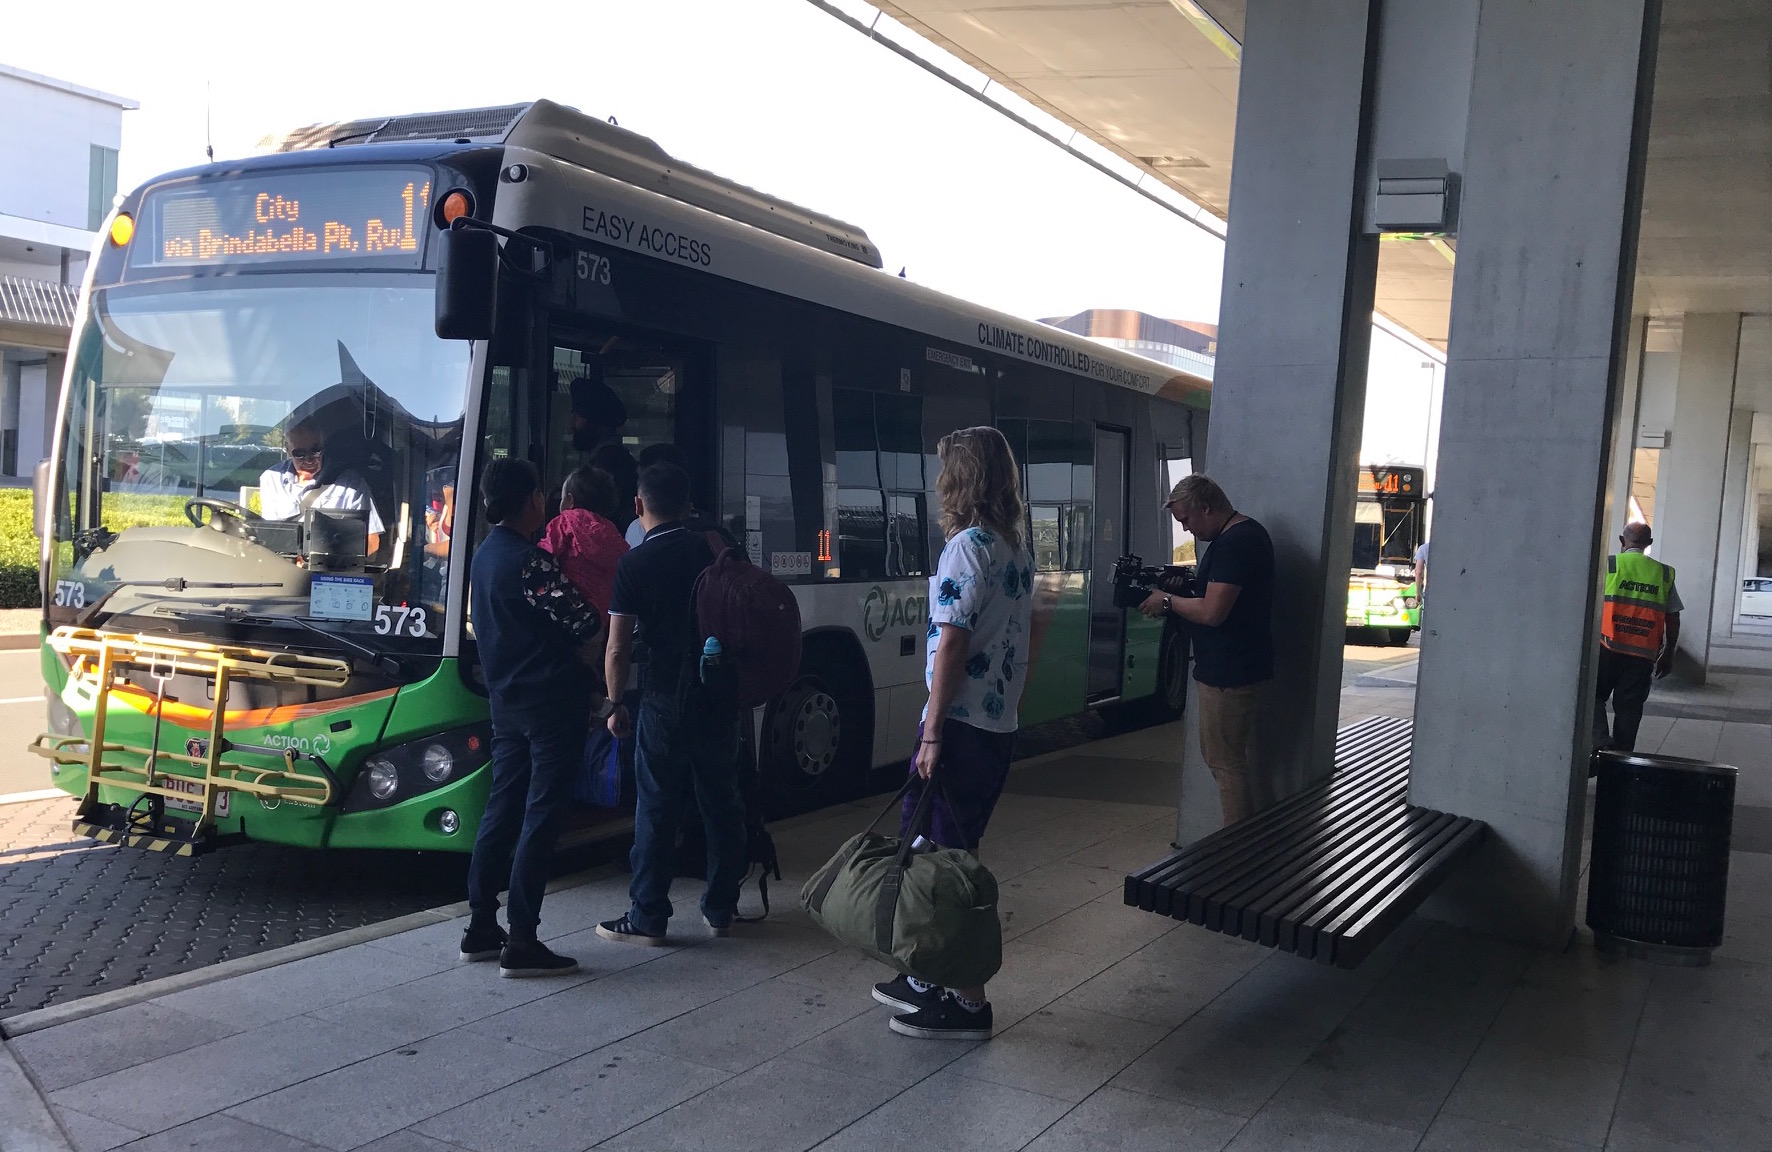 Passengers jump straight onto ACTION's airport bus